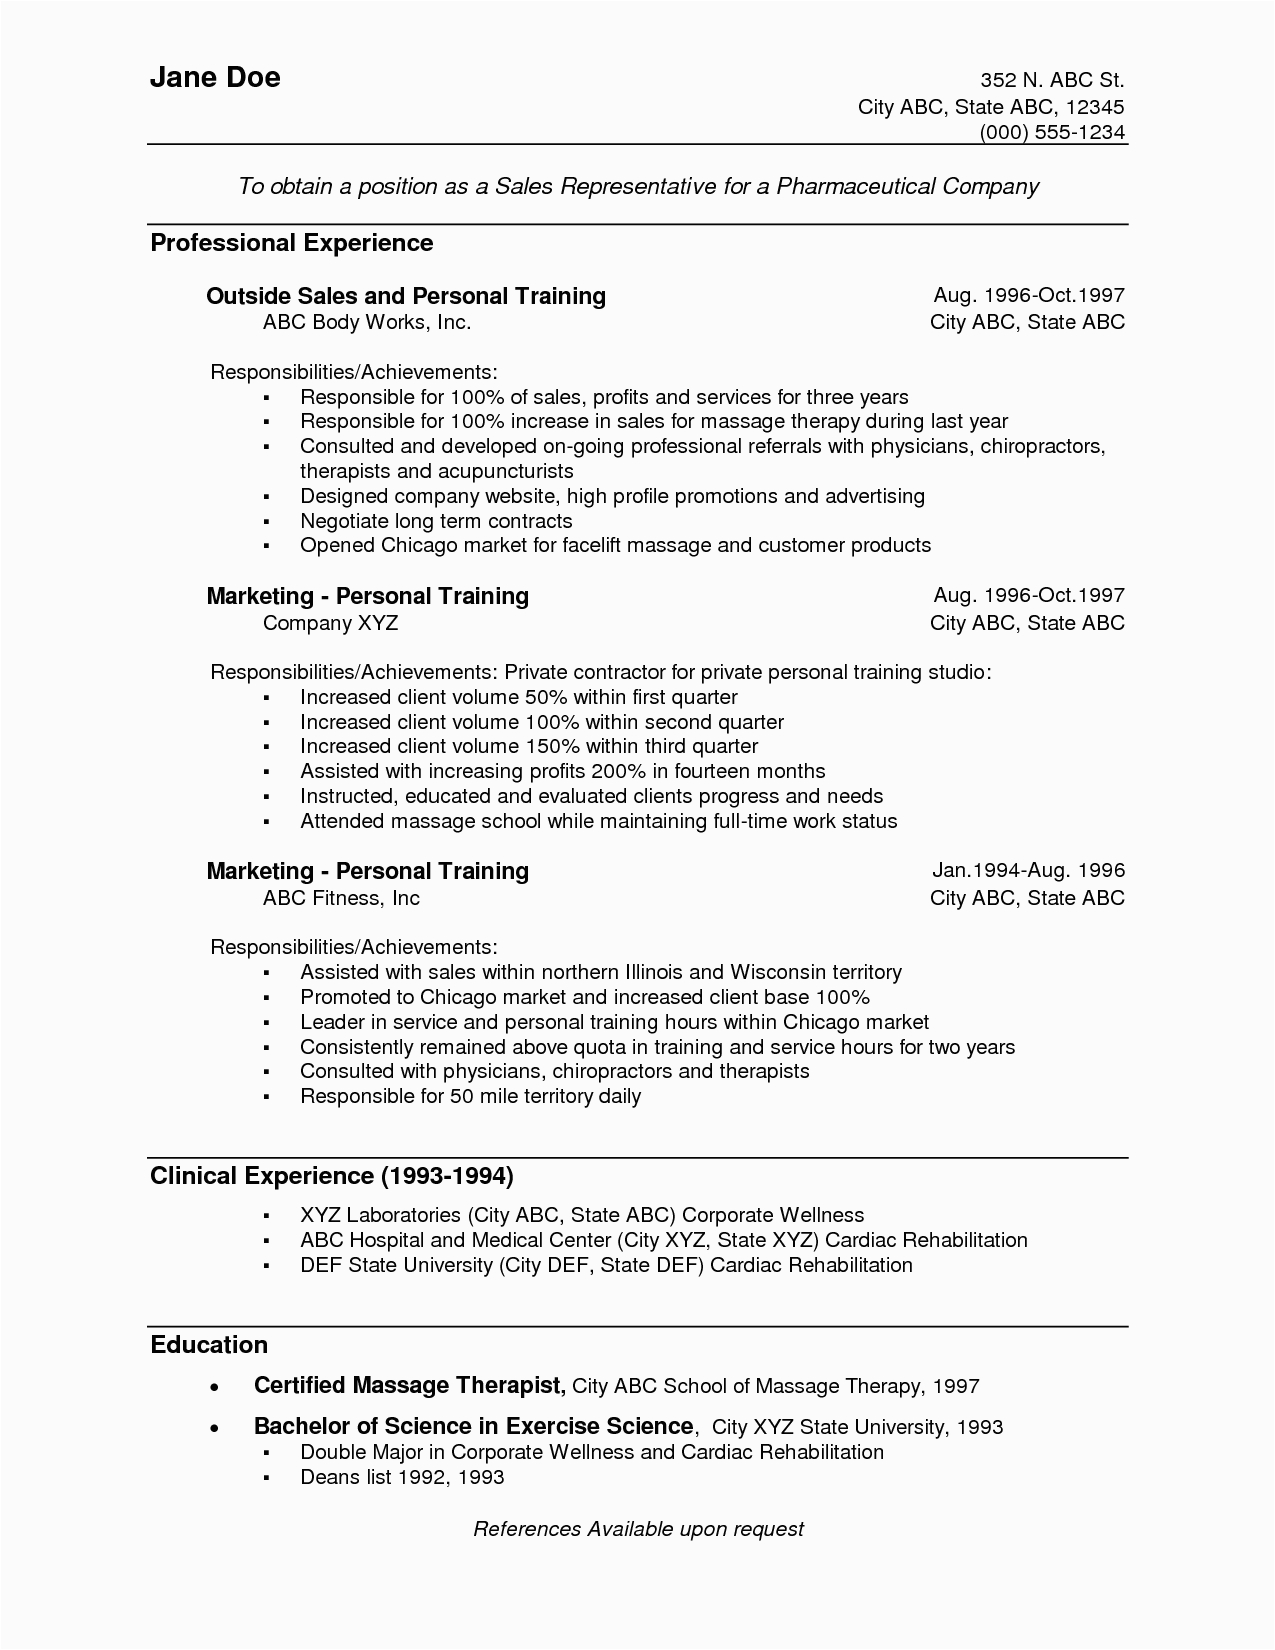 Sample Resume for Sales assistant with No Experience 14 15 Retail Resume Examples No Experience